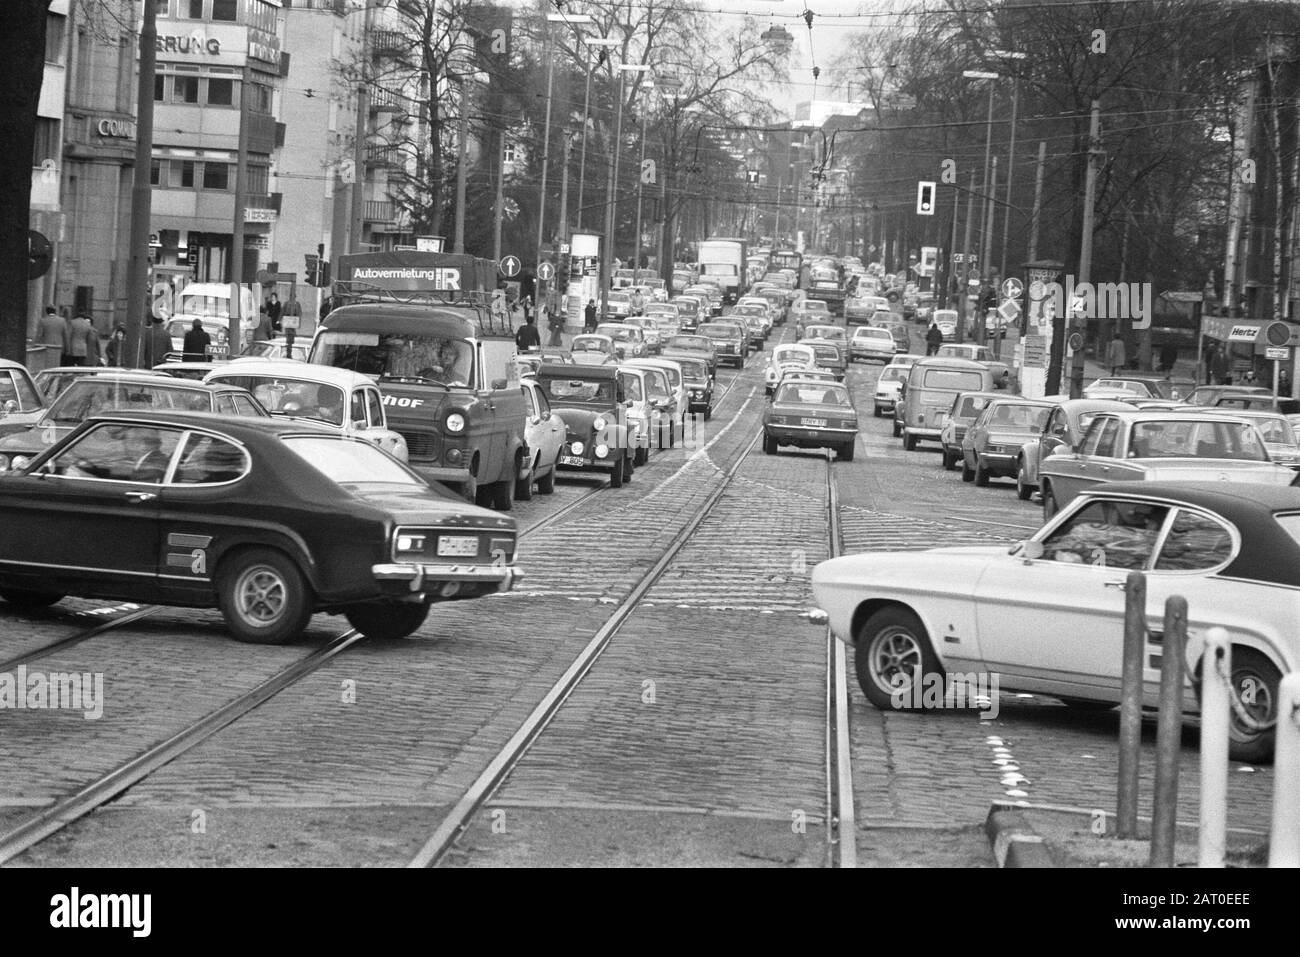 Strike in West Germany by mainly transport personnel  Busy on the street Date: February 12, 1974 Location: Düsseldorf, West Germany Keywords: cars, strikes Stock Photo